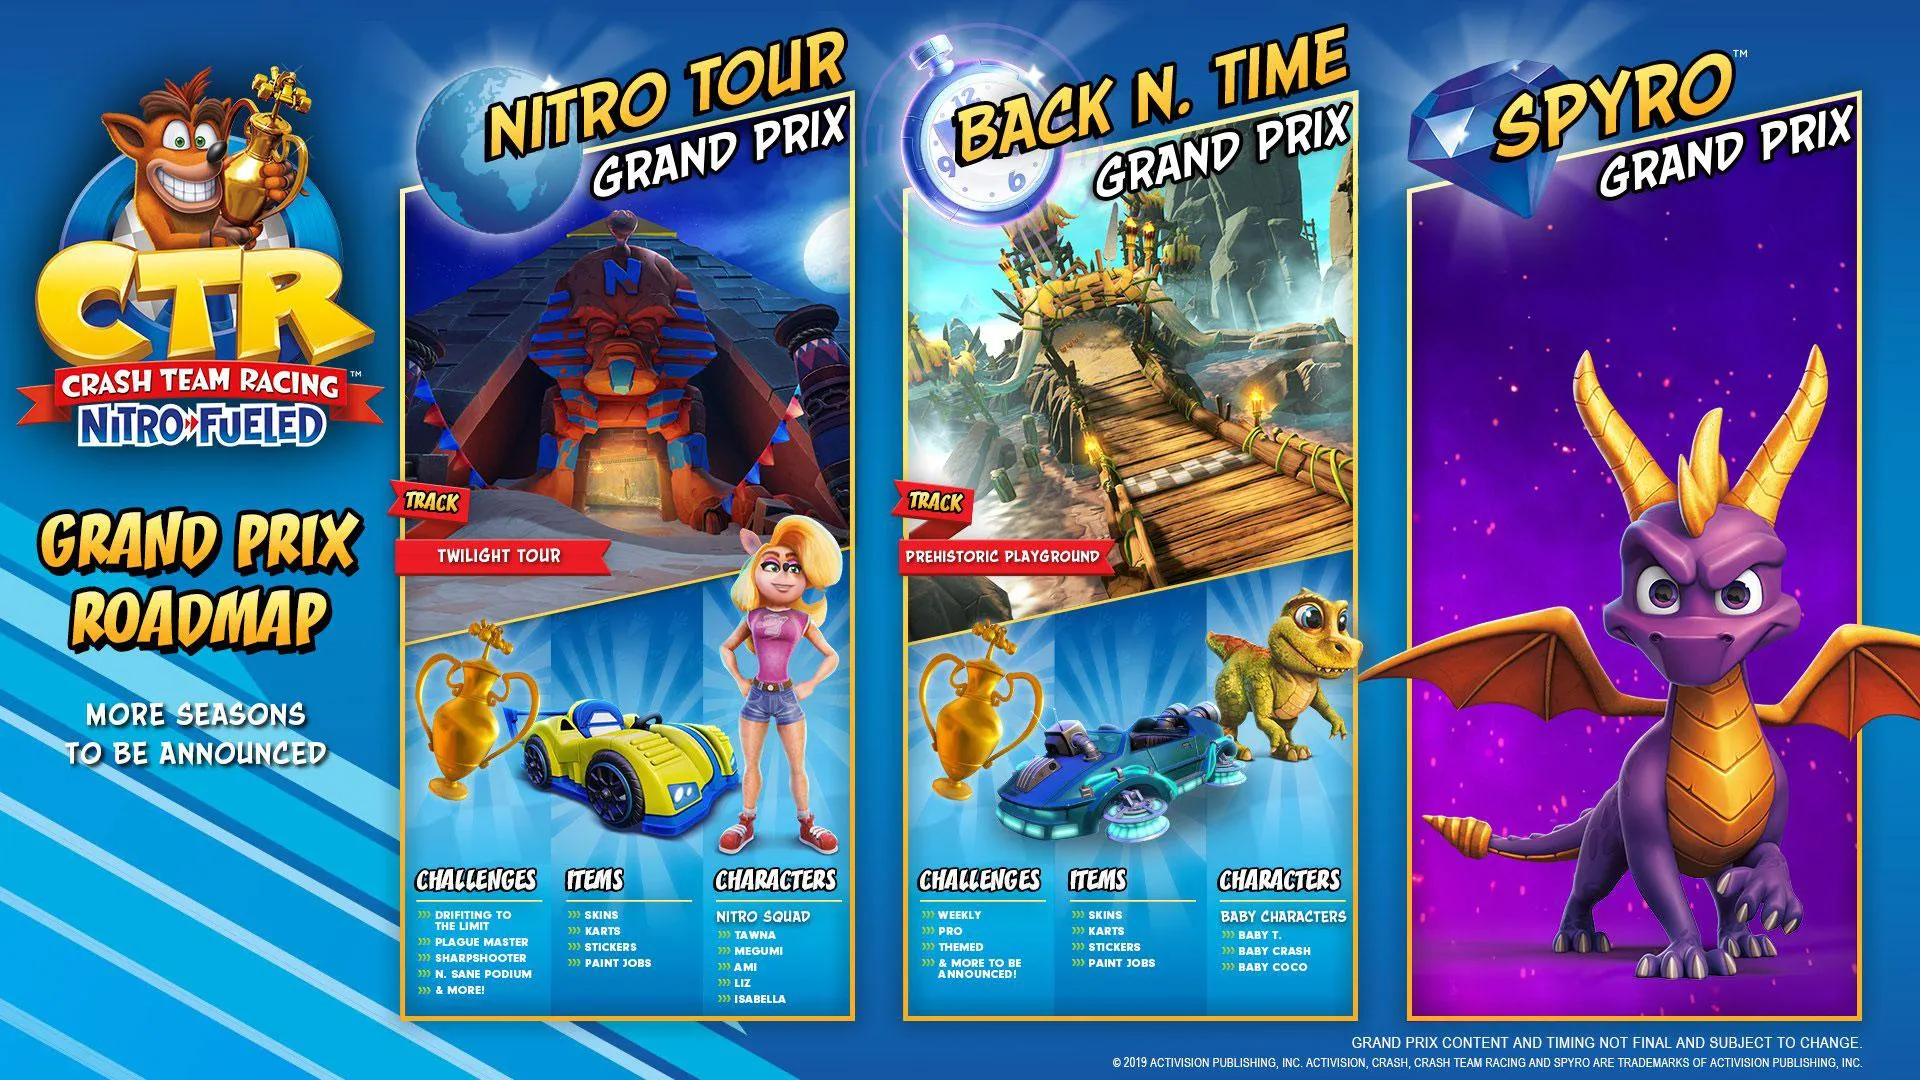 Grand Prix and Nitro Points Details for Crash Team Racing Nitro-Fueled